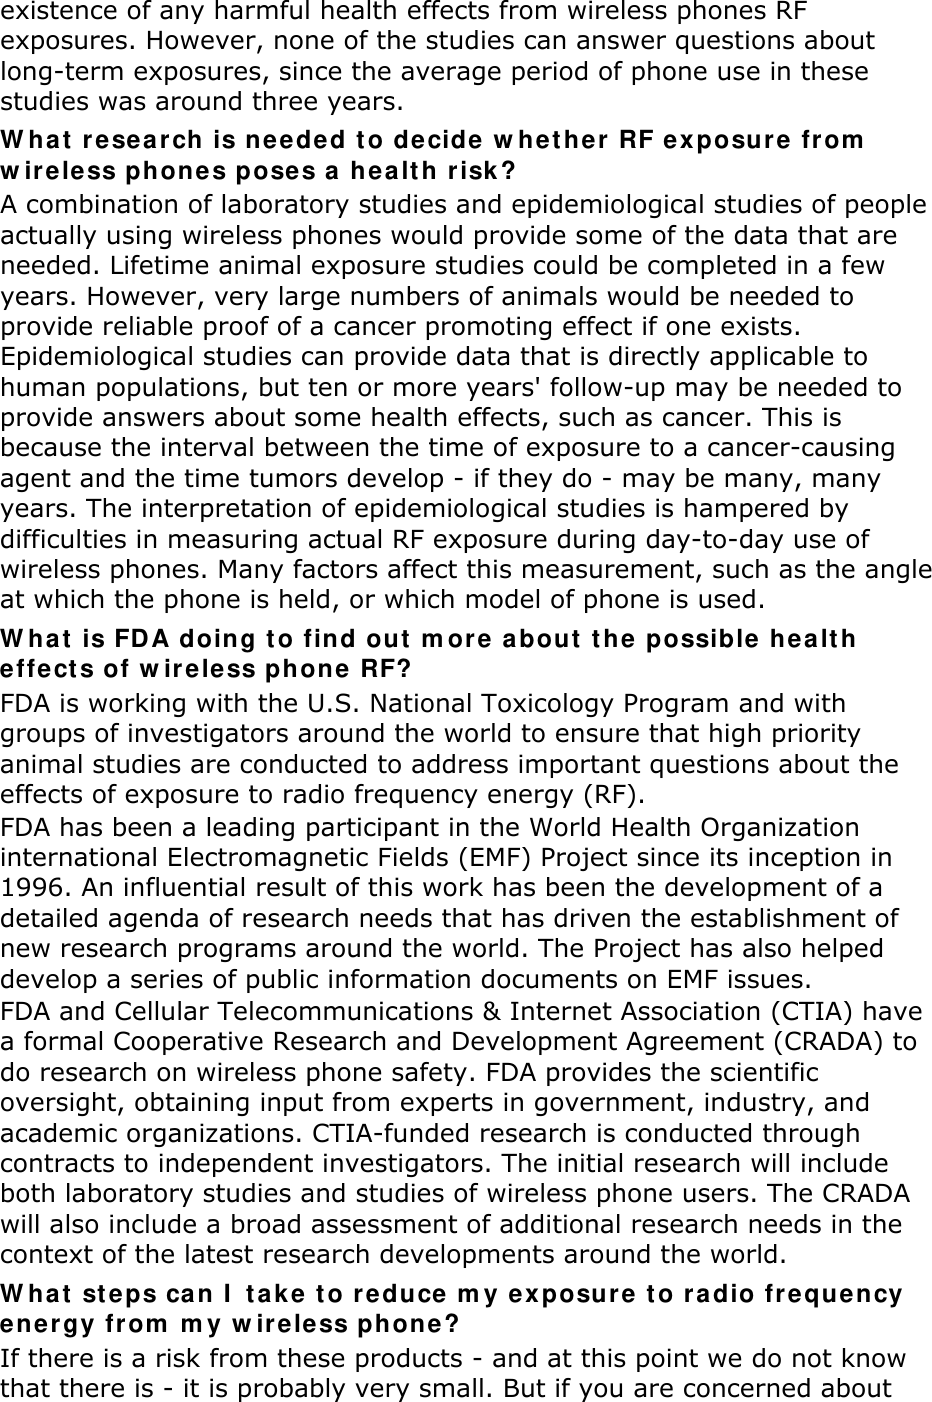 existence of any harmful health effects from wireless phones RF exposures. However, none of the studies can answer questions about long-term exposures, since the average period of phone use in these studies was around three years. W ha t  r e sea r ch is neede d t o decide w he t her  RF e x posu r e  from  w ireless phone s pose s a  he a lt h r isk ? A combination of laboratory studies and epidemiological studies of people actually using wireless phones would provide some of the data that are needed. Lifetime animal exposure studies could be completed in a few years. However, very large numbers of animals would be needed to provide reliable proof of a cancer promoting effect if one exists. Epidemiological studies can provide data that is directly applicable to human populations, but ten or more years&apos; follow-up may be needed to provide answers about some health effects, such as cancer. This is because the interval between the time of exposure to a cancer-causing agent and the time tumors develop - if they do - may be many, many years. The interpretation of epidemiological studies is hampered by difficulties in measuring actual RF exposure during day-to-day use of wireless phones. Many factors affect this measurement, such as the angle at which the phone is held, or which model of phone is used. W h a t  is FDA doing t o find out  m ore  about  t he possible health effe ct s of w ir ele ss phone RF? FDA is working with the U.S. National Toxicology Program and with groups of investigators around the world to ensure that high priority animal studies are conducted to address important questions about the effects of exposure to radio frequency energy (RF). FDA has been a leading participant in the World Health Organization international Electromagnetic Fields (EMF) Project since its inception in 1996. An influential result of this work has been the development of a detailed agenda of research needs that has driven the establishment of new research programs around the world. The Project has also helped develop a series of public information documents on EMF issues. FDA and Cellular Telecommunications &amp; Internet Association (CTIA) have a formal Cooperative Research and Development Agreement (CRADA) to do research on wireless phone safety. FDA provides the scientific oversight, obtaining input from experts in government, industry, and academic organizations. CTIA-funded research is conducted through contracts to independent investigators. The initial research will include both laboratory studies and studies of wireless phone users. The CRADA will also include a broad assessment of additional research needs in the context of the latest research developments around the world. W hat  st eps ca n I  ta k e to re duce m y exposure to radio fre qu ency energy fr om  m y w ir eless phone? If there is a risk from these products - and at this point we do not know that there is - it is probably very small. But if you are concerned about 